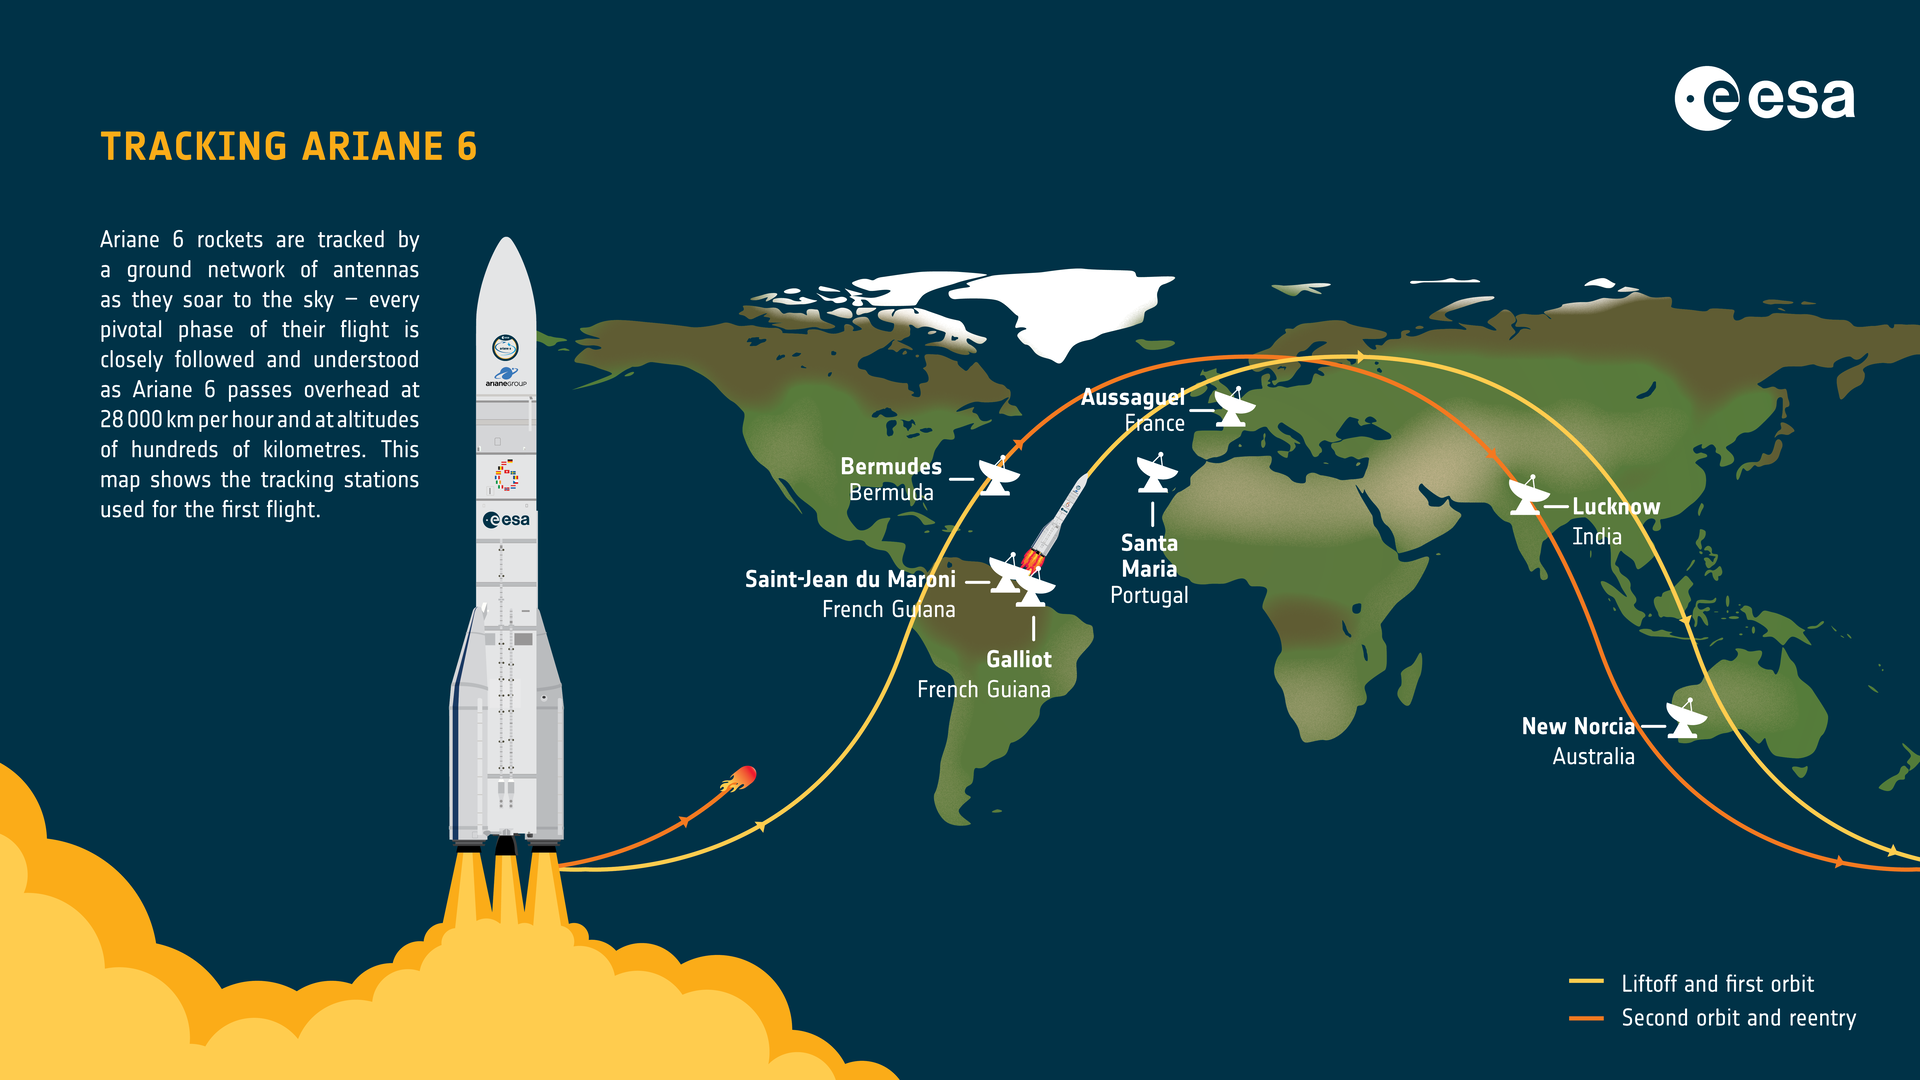 Ariane_6_first_flight_tracking_infographic_pillars.png.41fb7364388b98fe9e9049c444ab5816.png